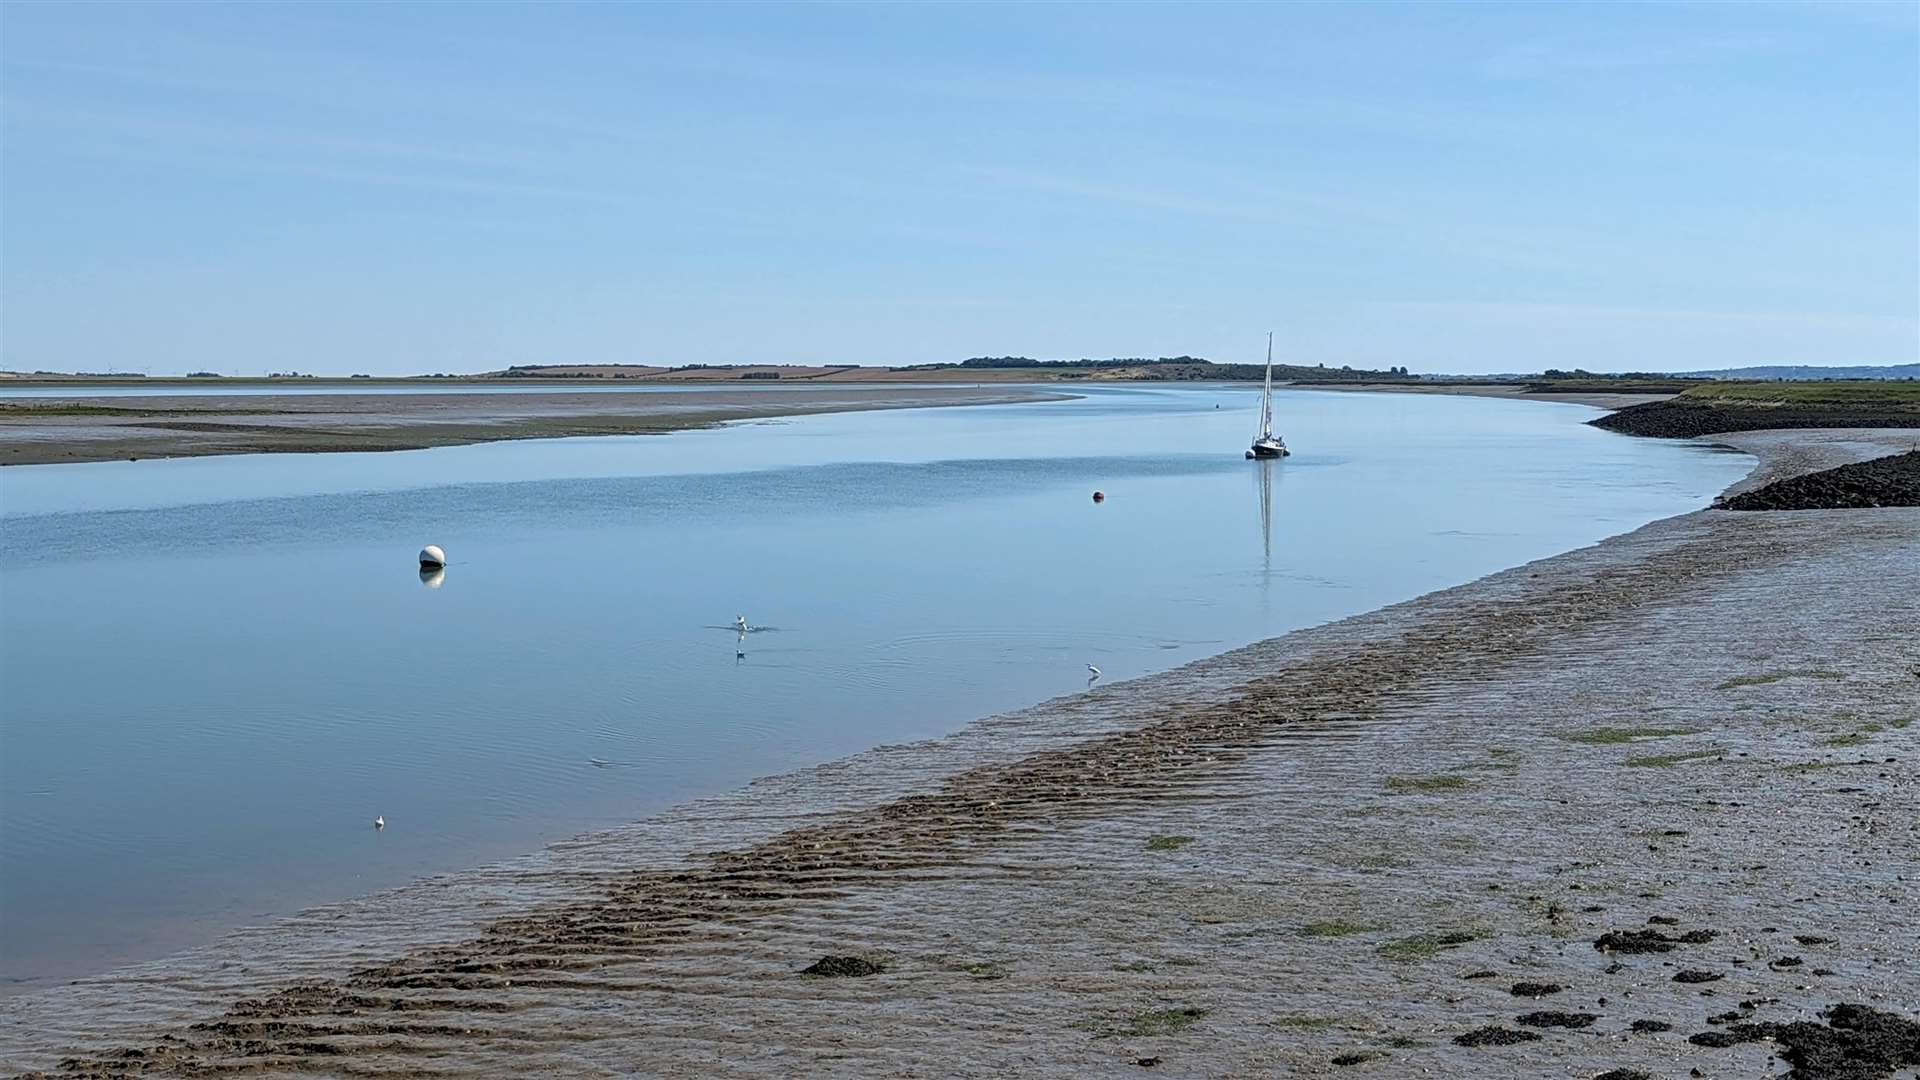 A sail boat plots a path through the Swale channel